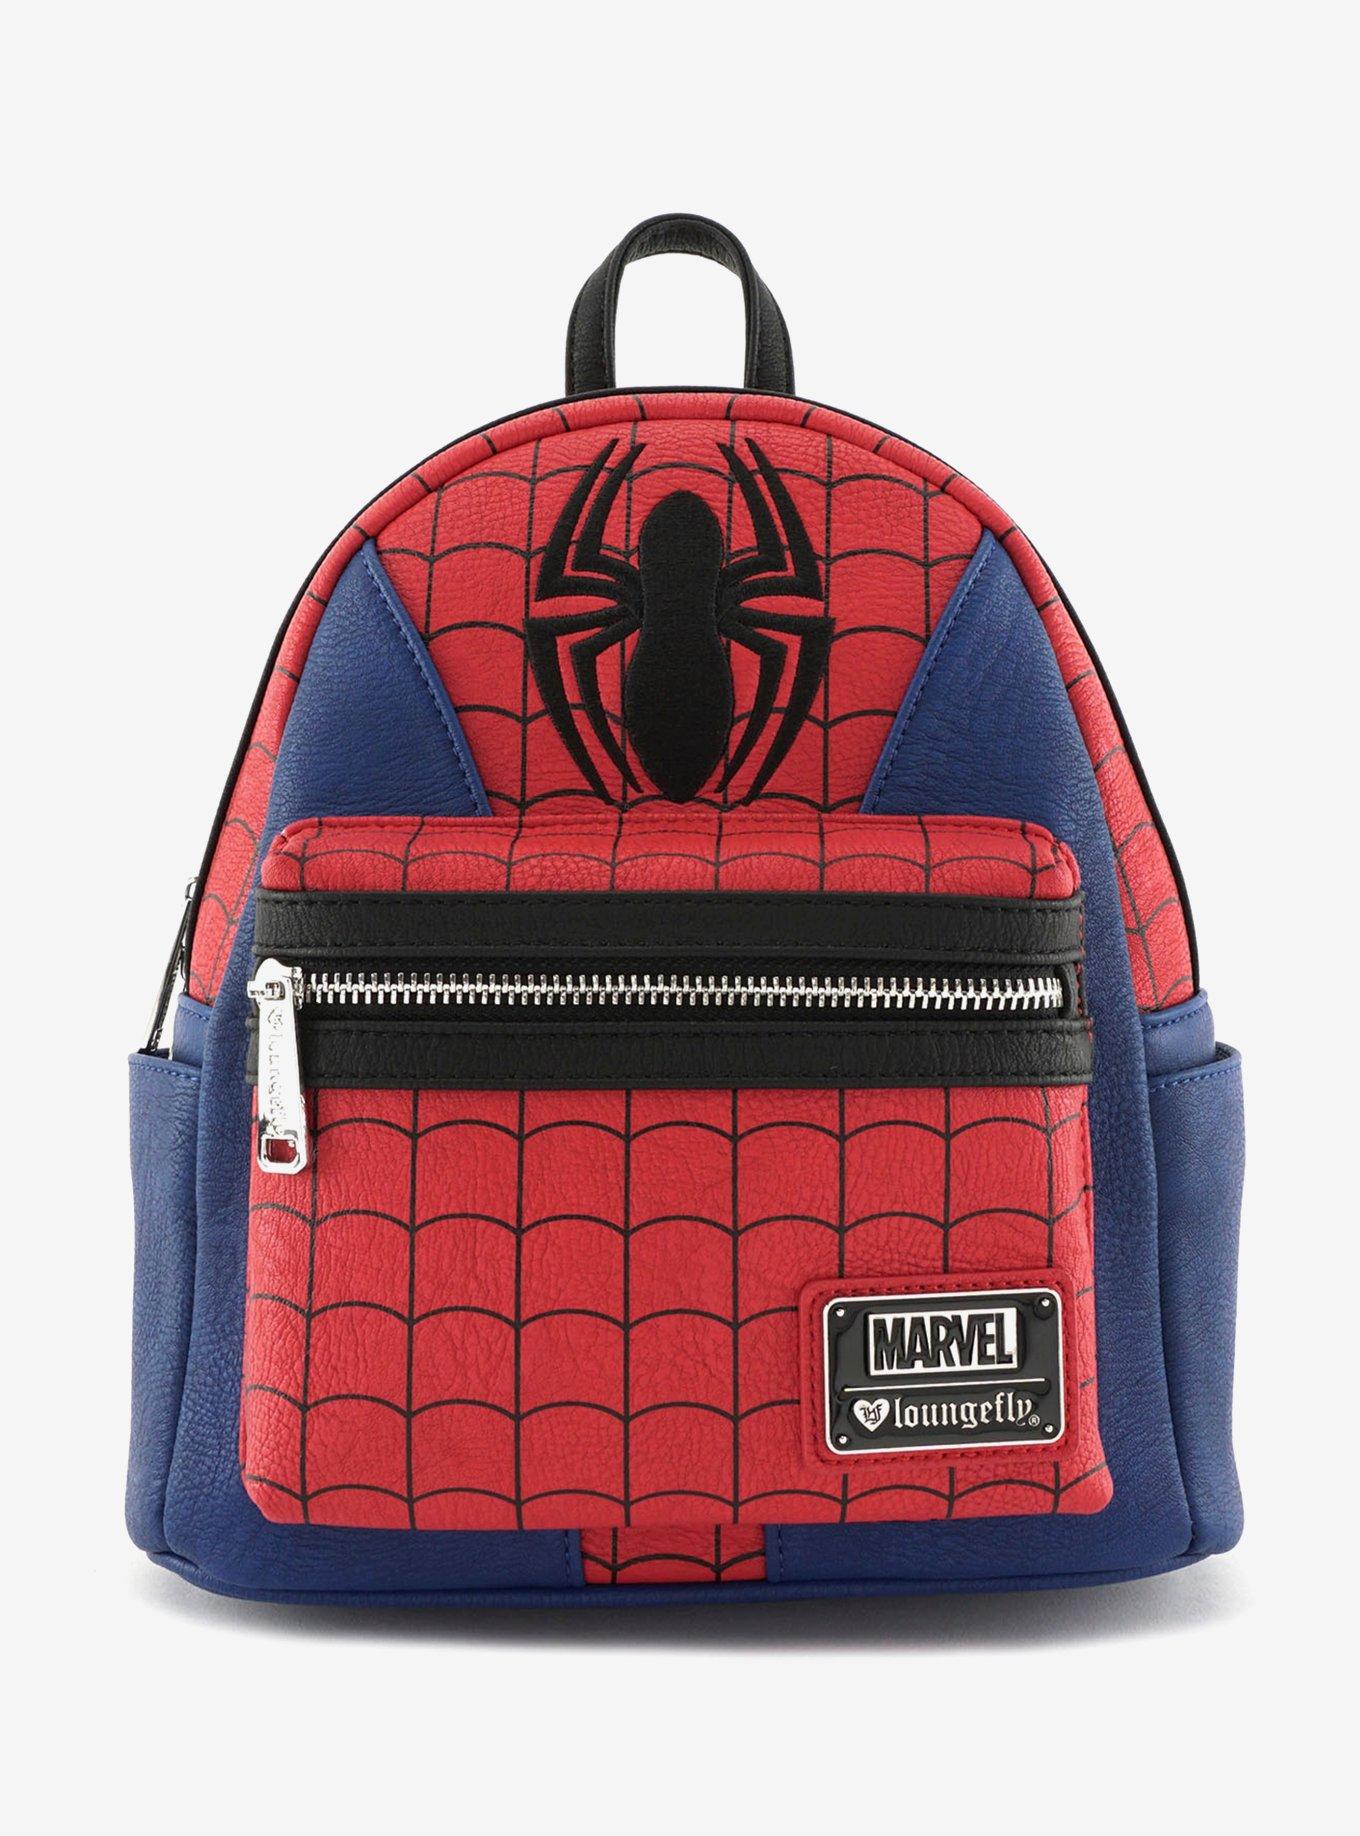 Loungefly Marvel Spider-Man Mini Backpack | Her Universe